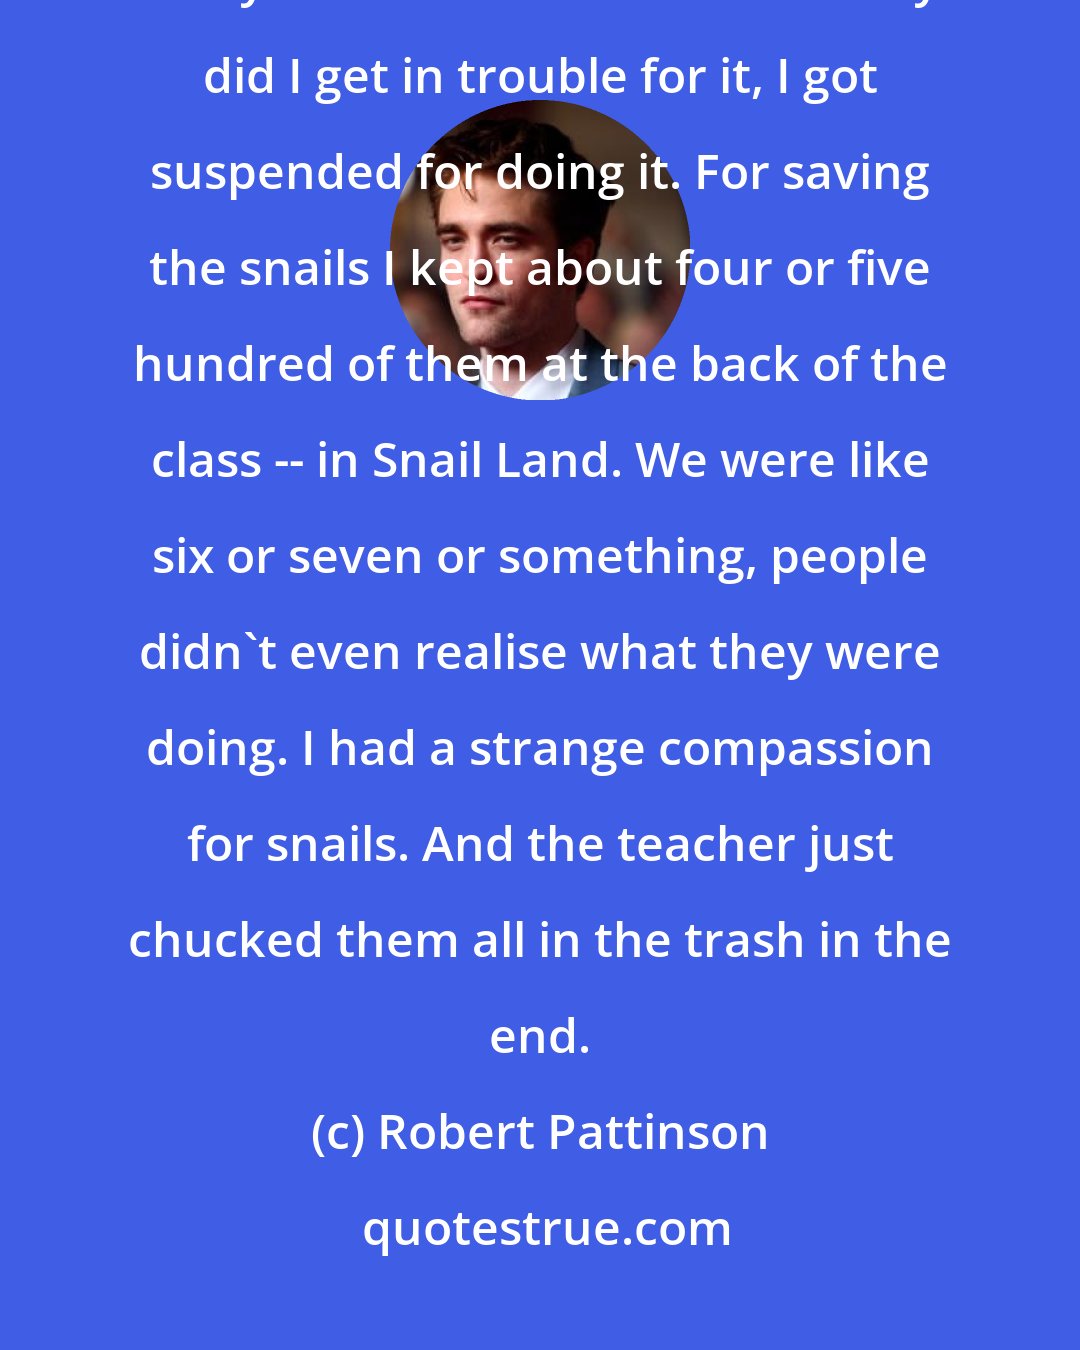 Robert Pattinson: Everyone used to chuck snails at each other at school, and I used to try and save them. And not only did I get in trouble for it, I got suspended for doing it. For saving the snails I kept about four or five hundred of them at the back of the class -- in Snail Land. We were like six or seven or something, people didn't even realise what they were doing. I had a strange compassion for snails. And the teacher just chucked them all in the trash in the end.